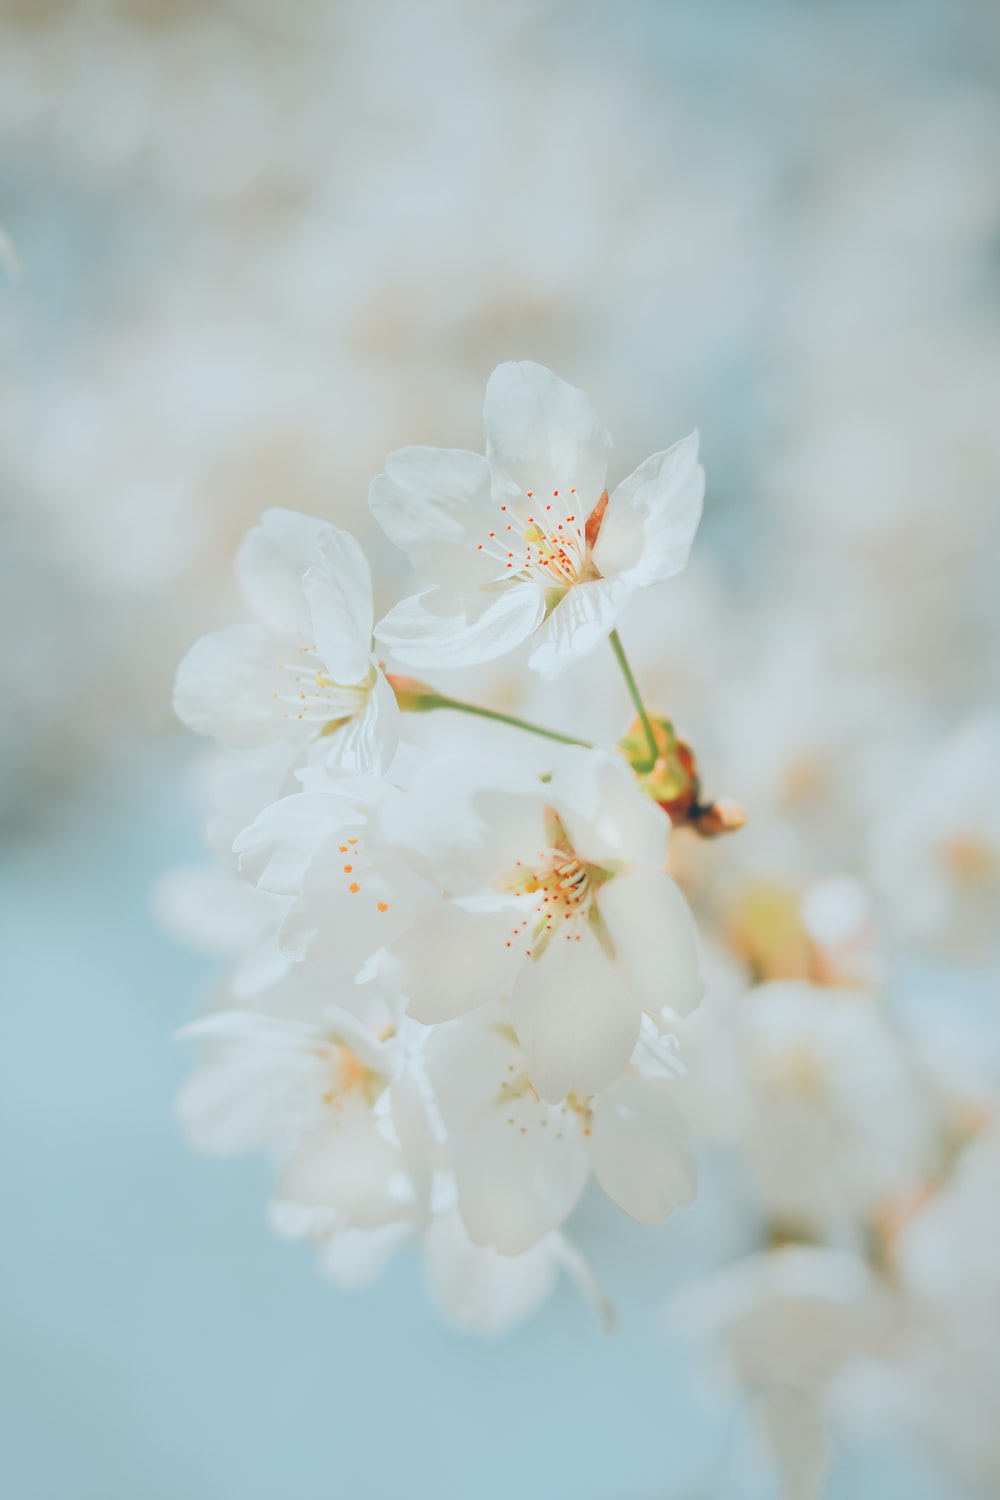 White Cherry Blossom Picture. Download Free Image